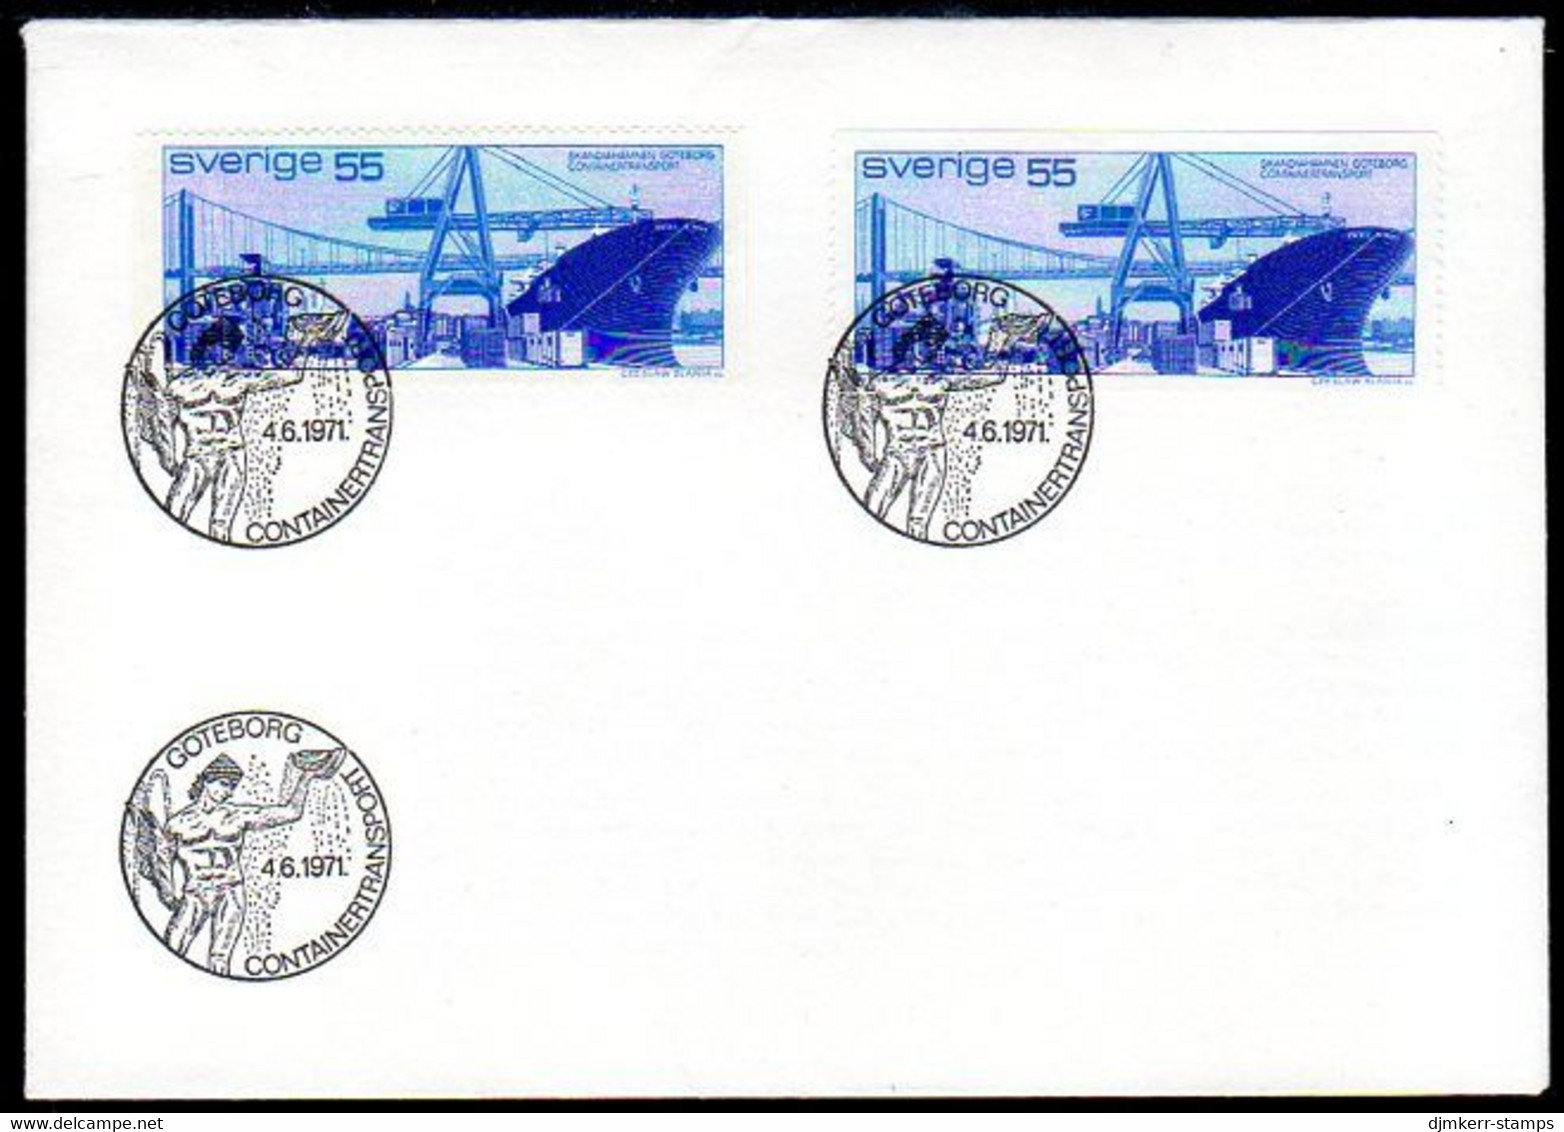 SWEDEN 1971  Container Ship FDC.  Michel 709A-C - FDC